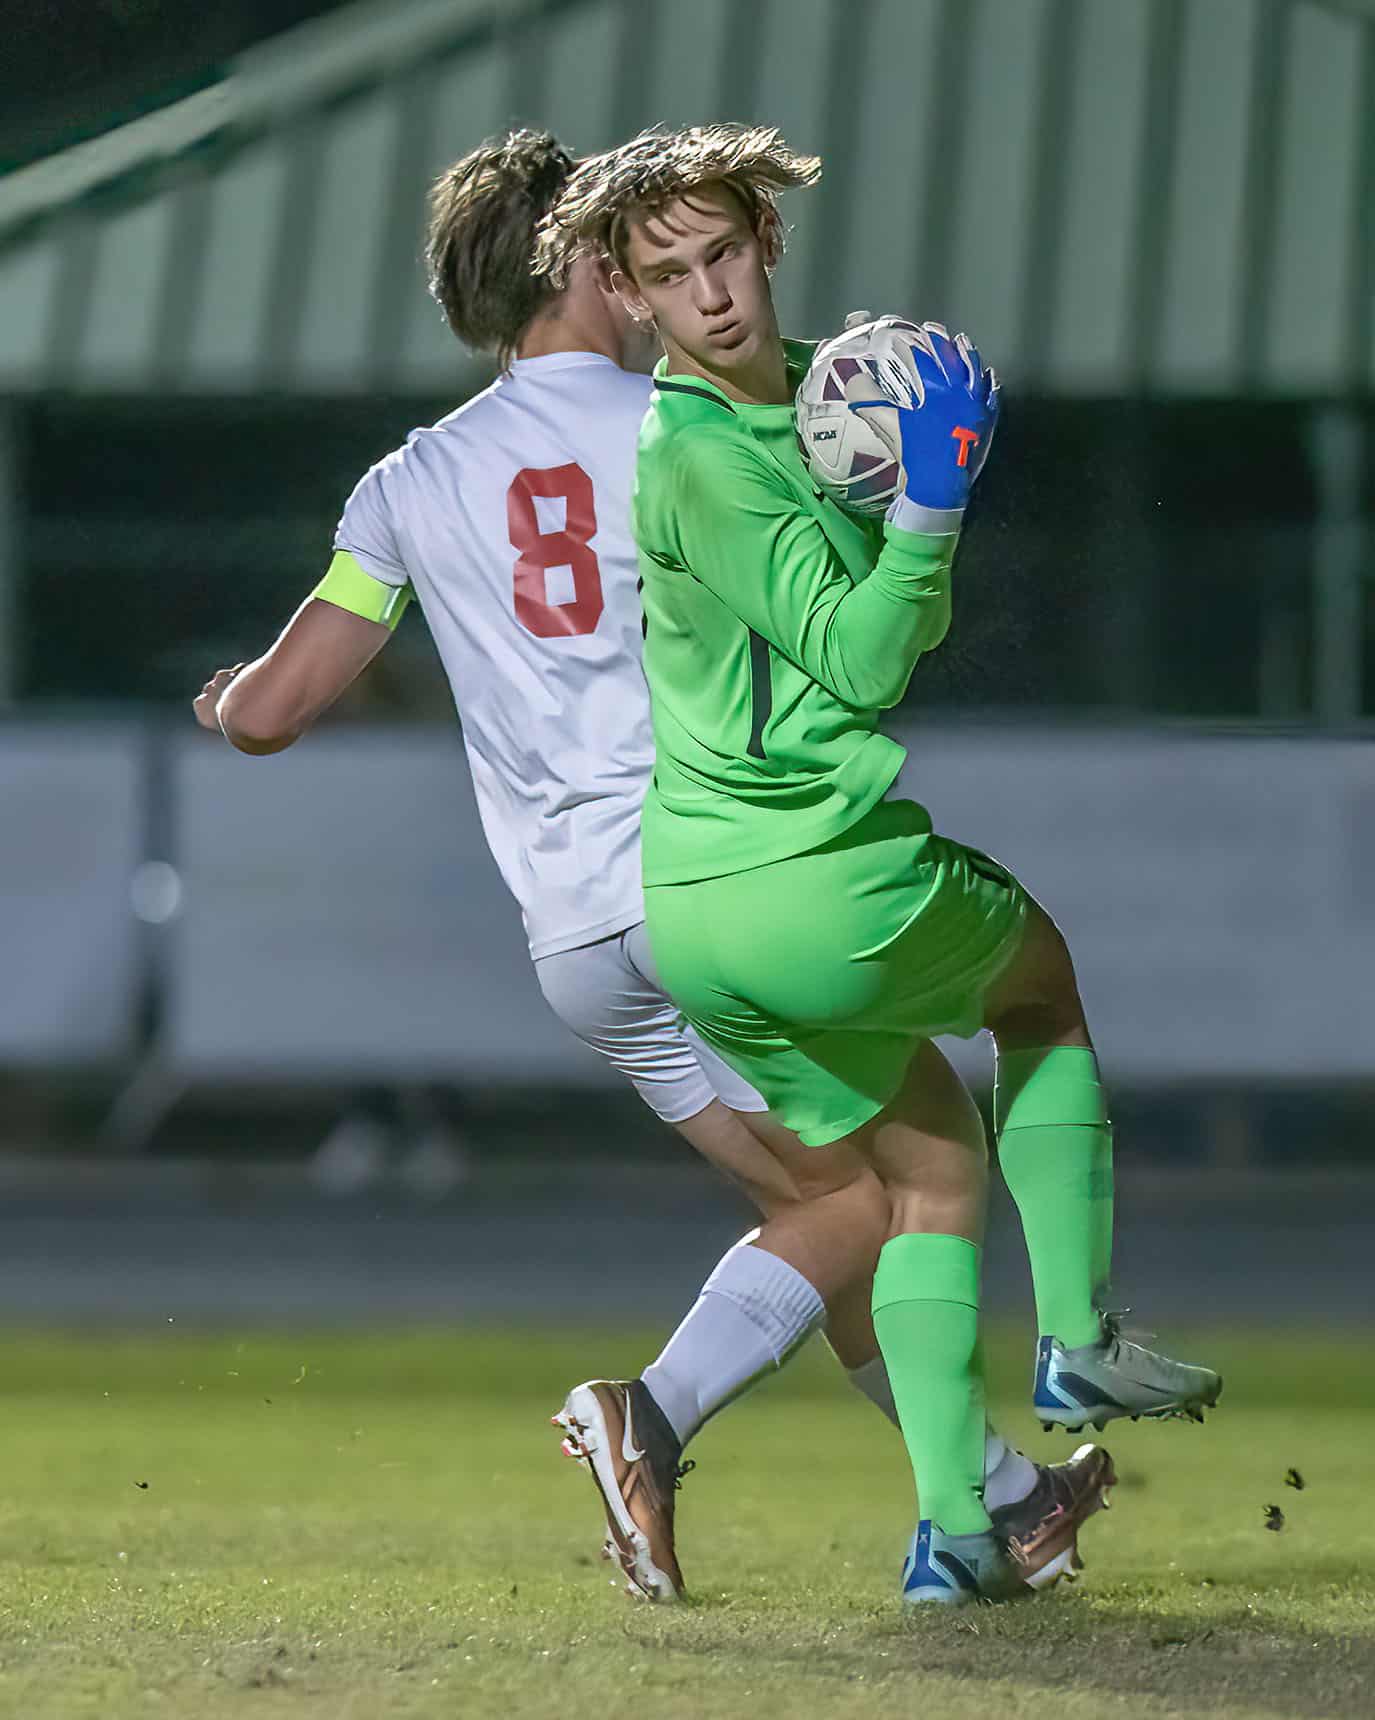 Nature Coast keeper , Cole Pretorius, snatches a loose ball away from the advance of Springstead’s Murphy Anderson, 8 Friday at NCT. Photo by JOE DiCRISTOFALO